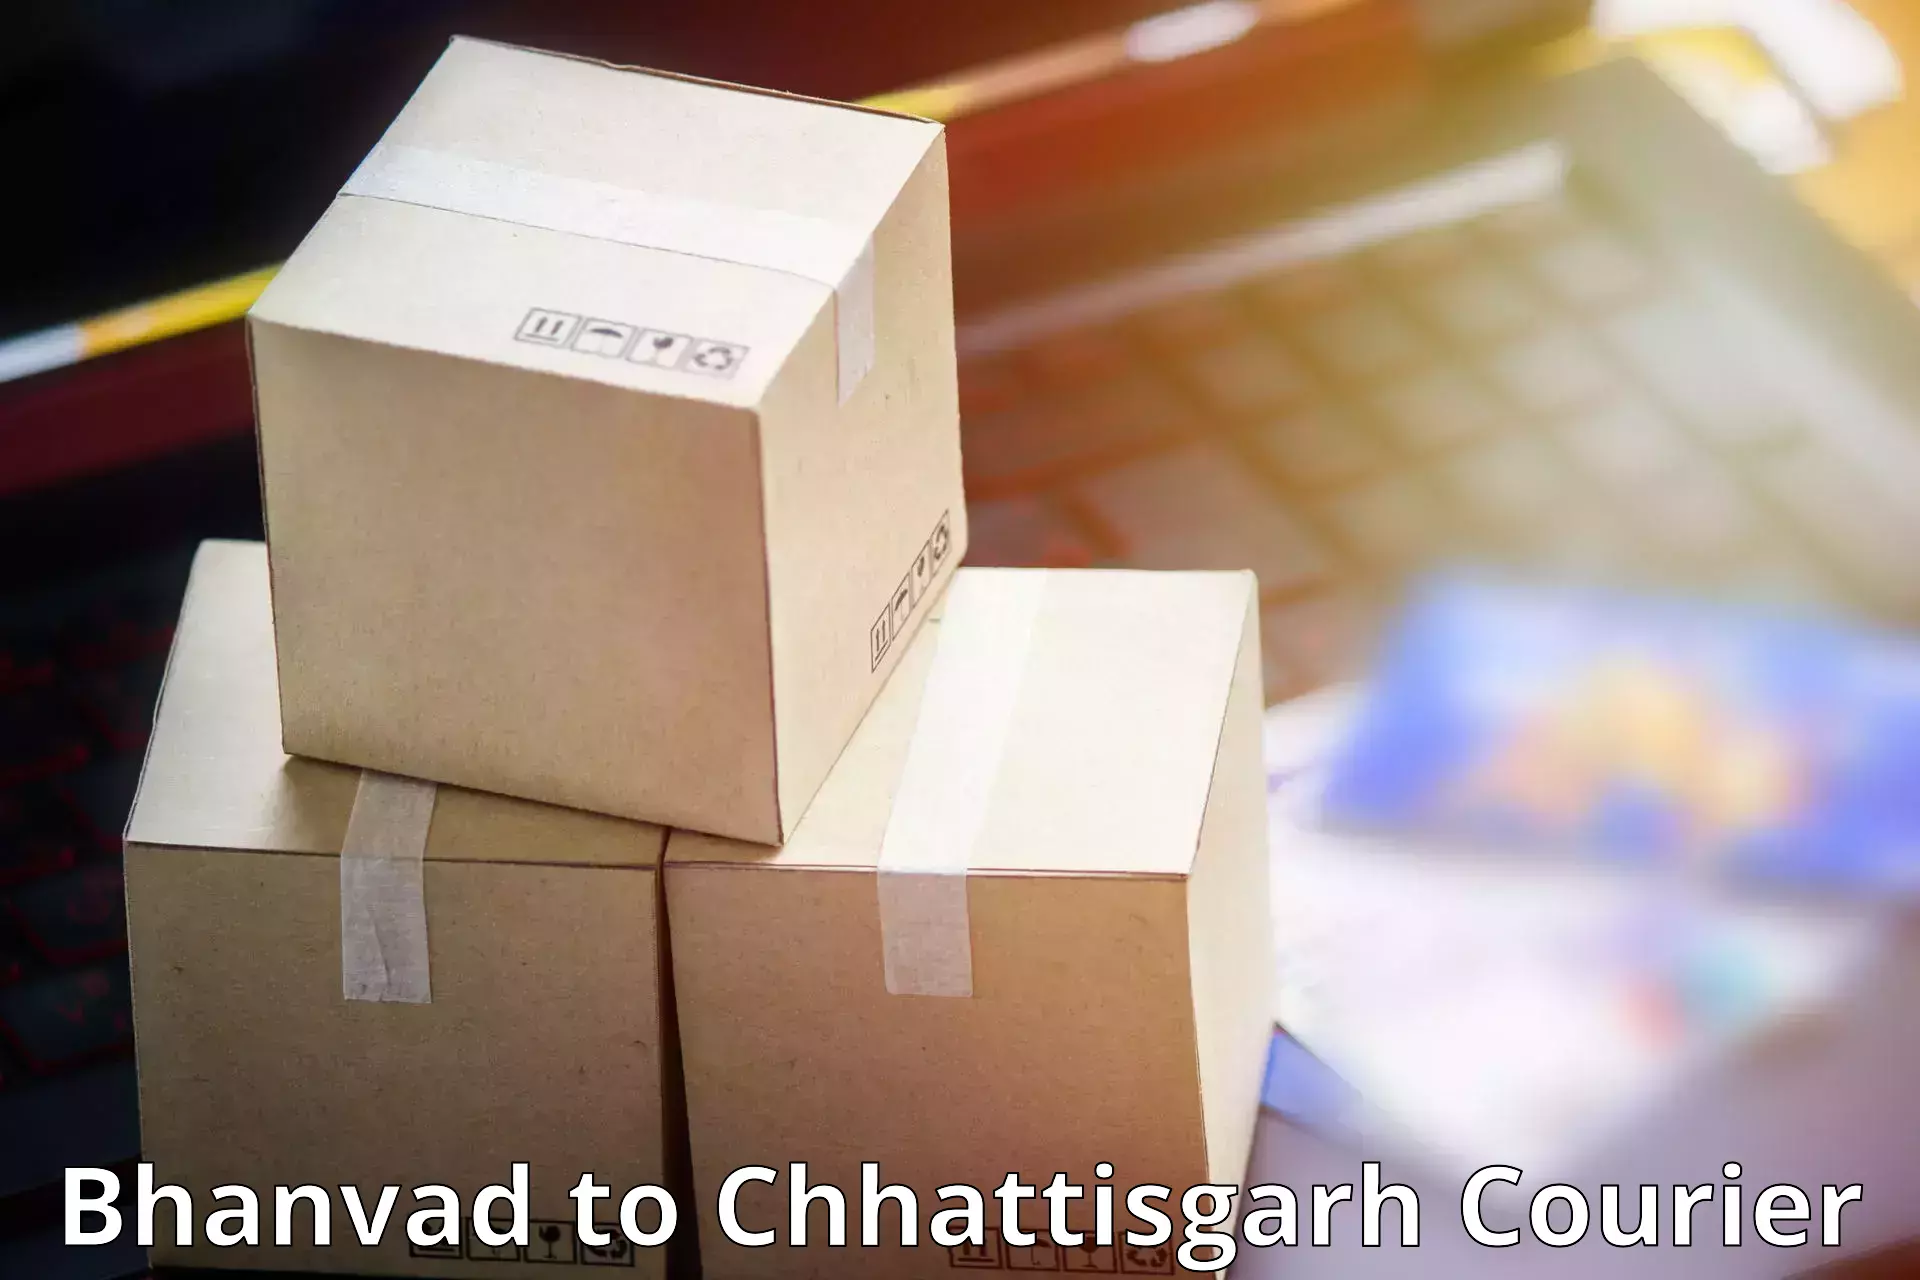 Parcel delivery automation Bhanvad to Raigarh